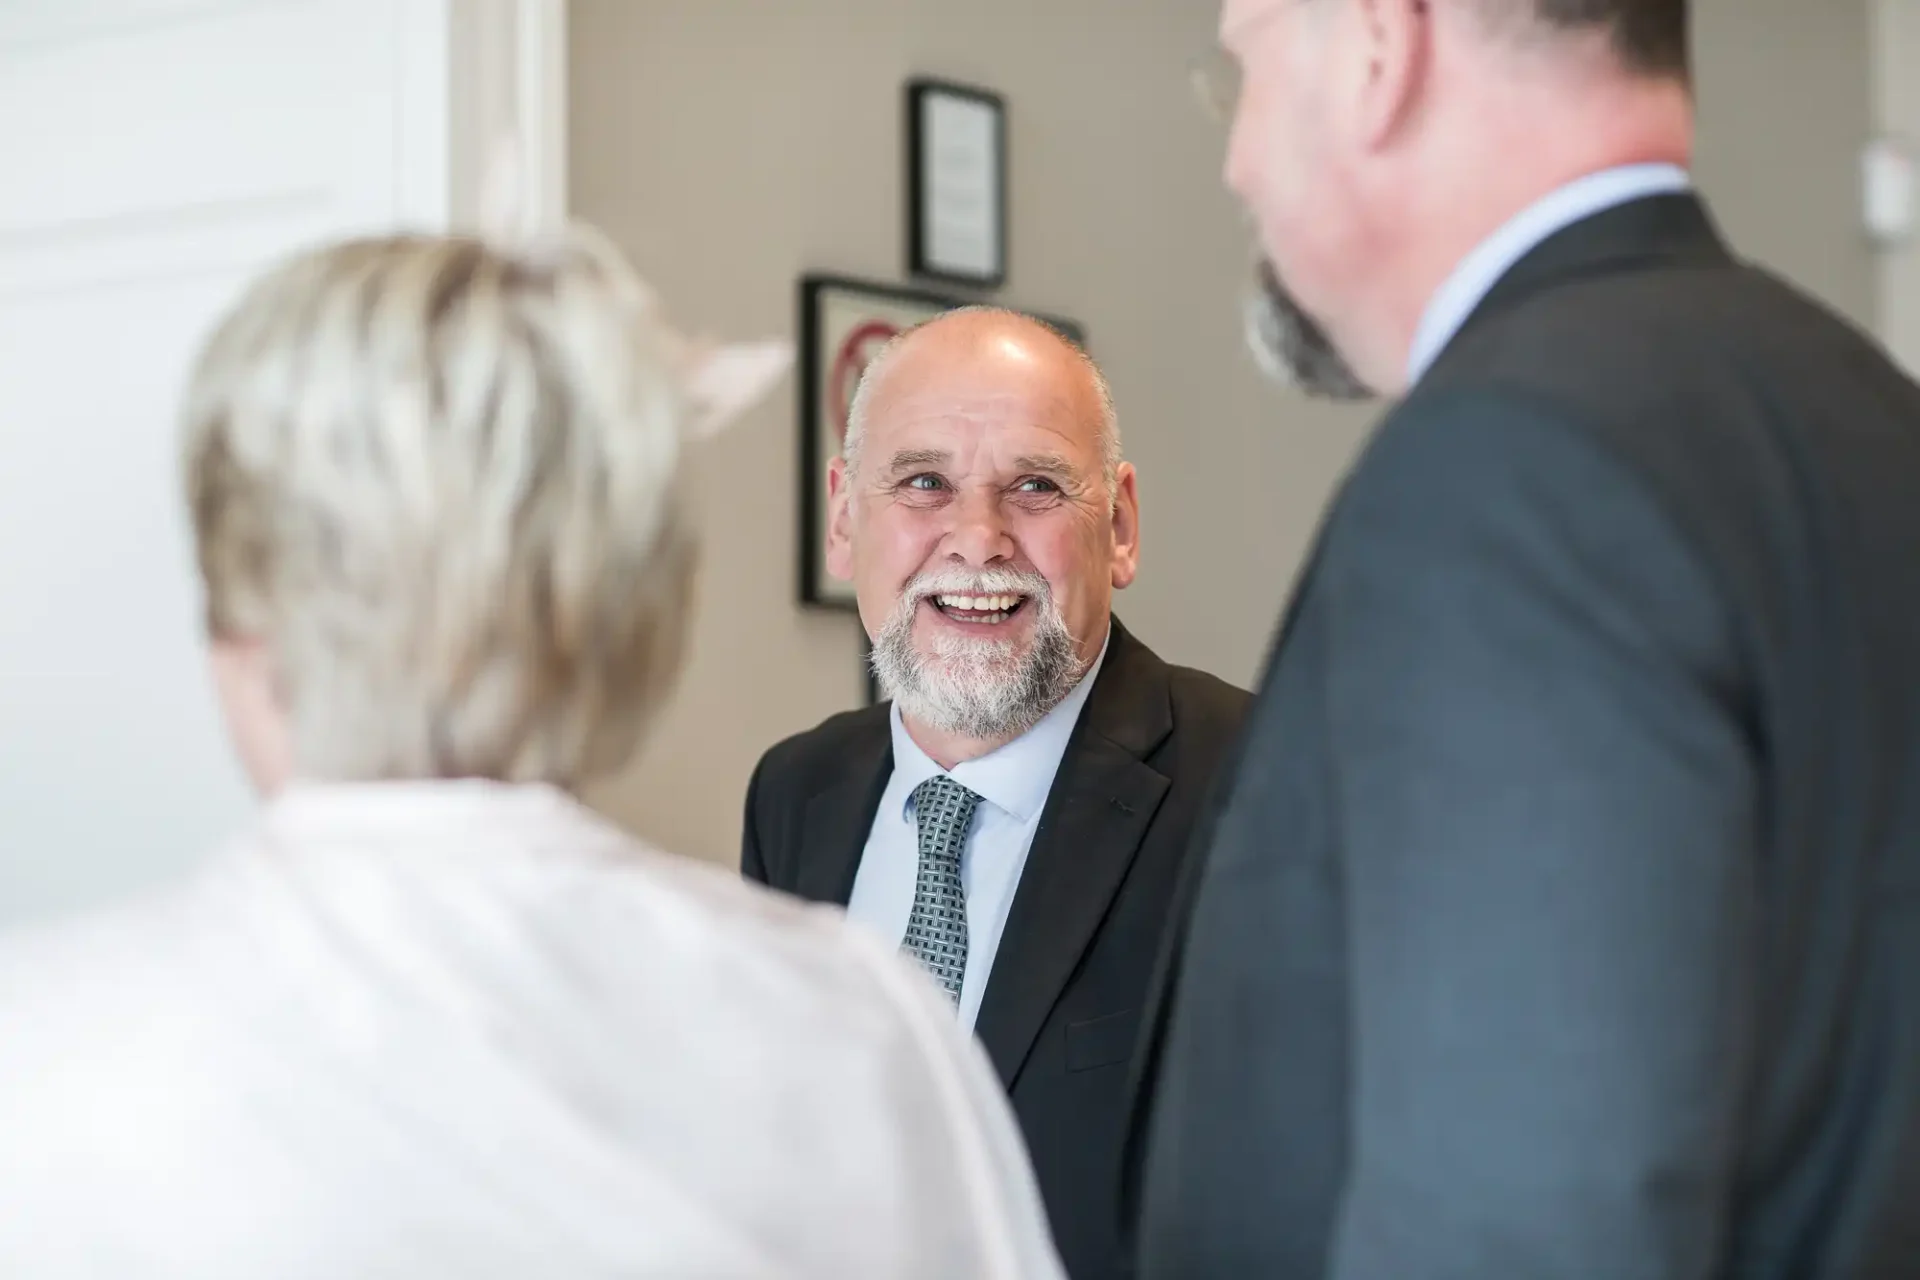 A smiling bald man with a beard, wearing a suit, conversing with two people whose backs are to the camera in a room with framed pictures on the wall.